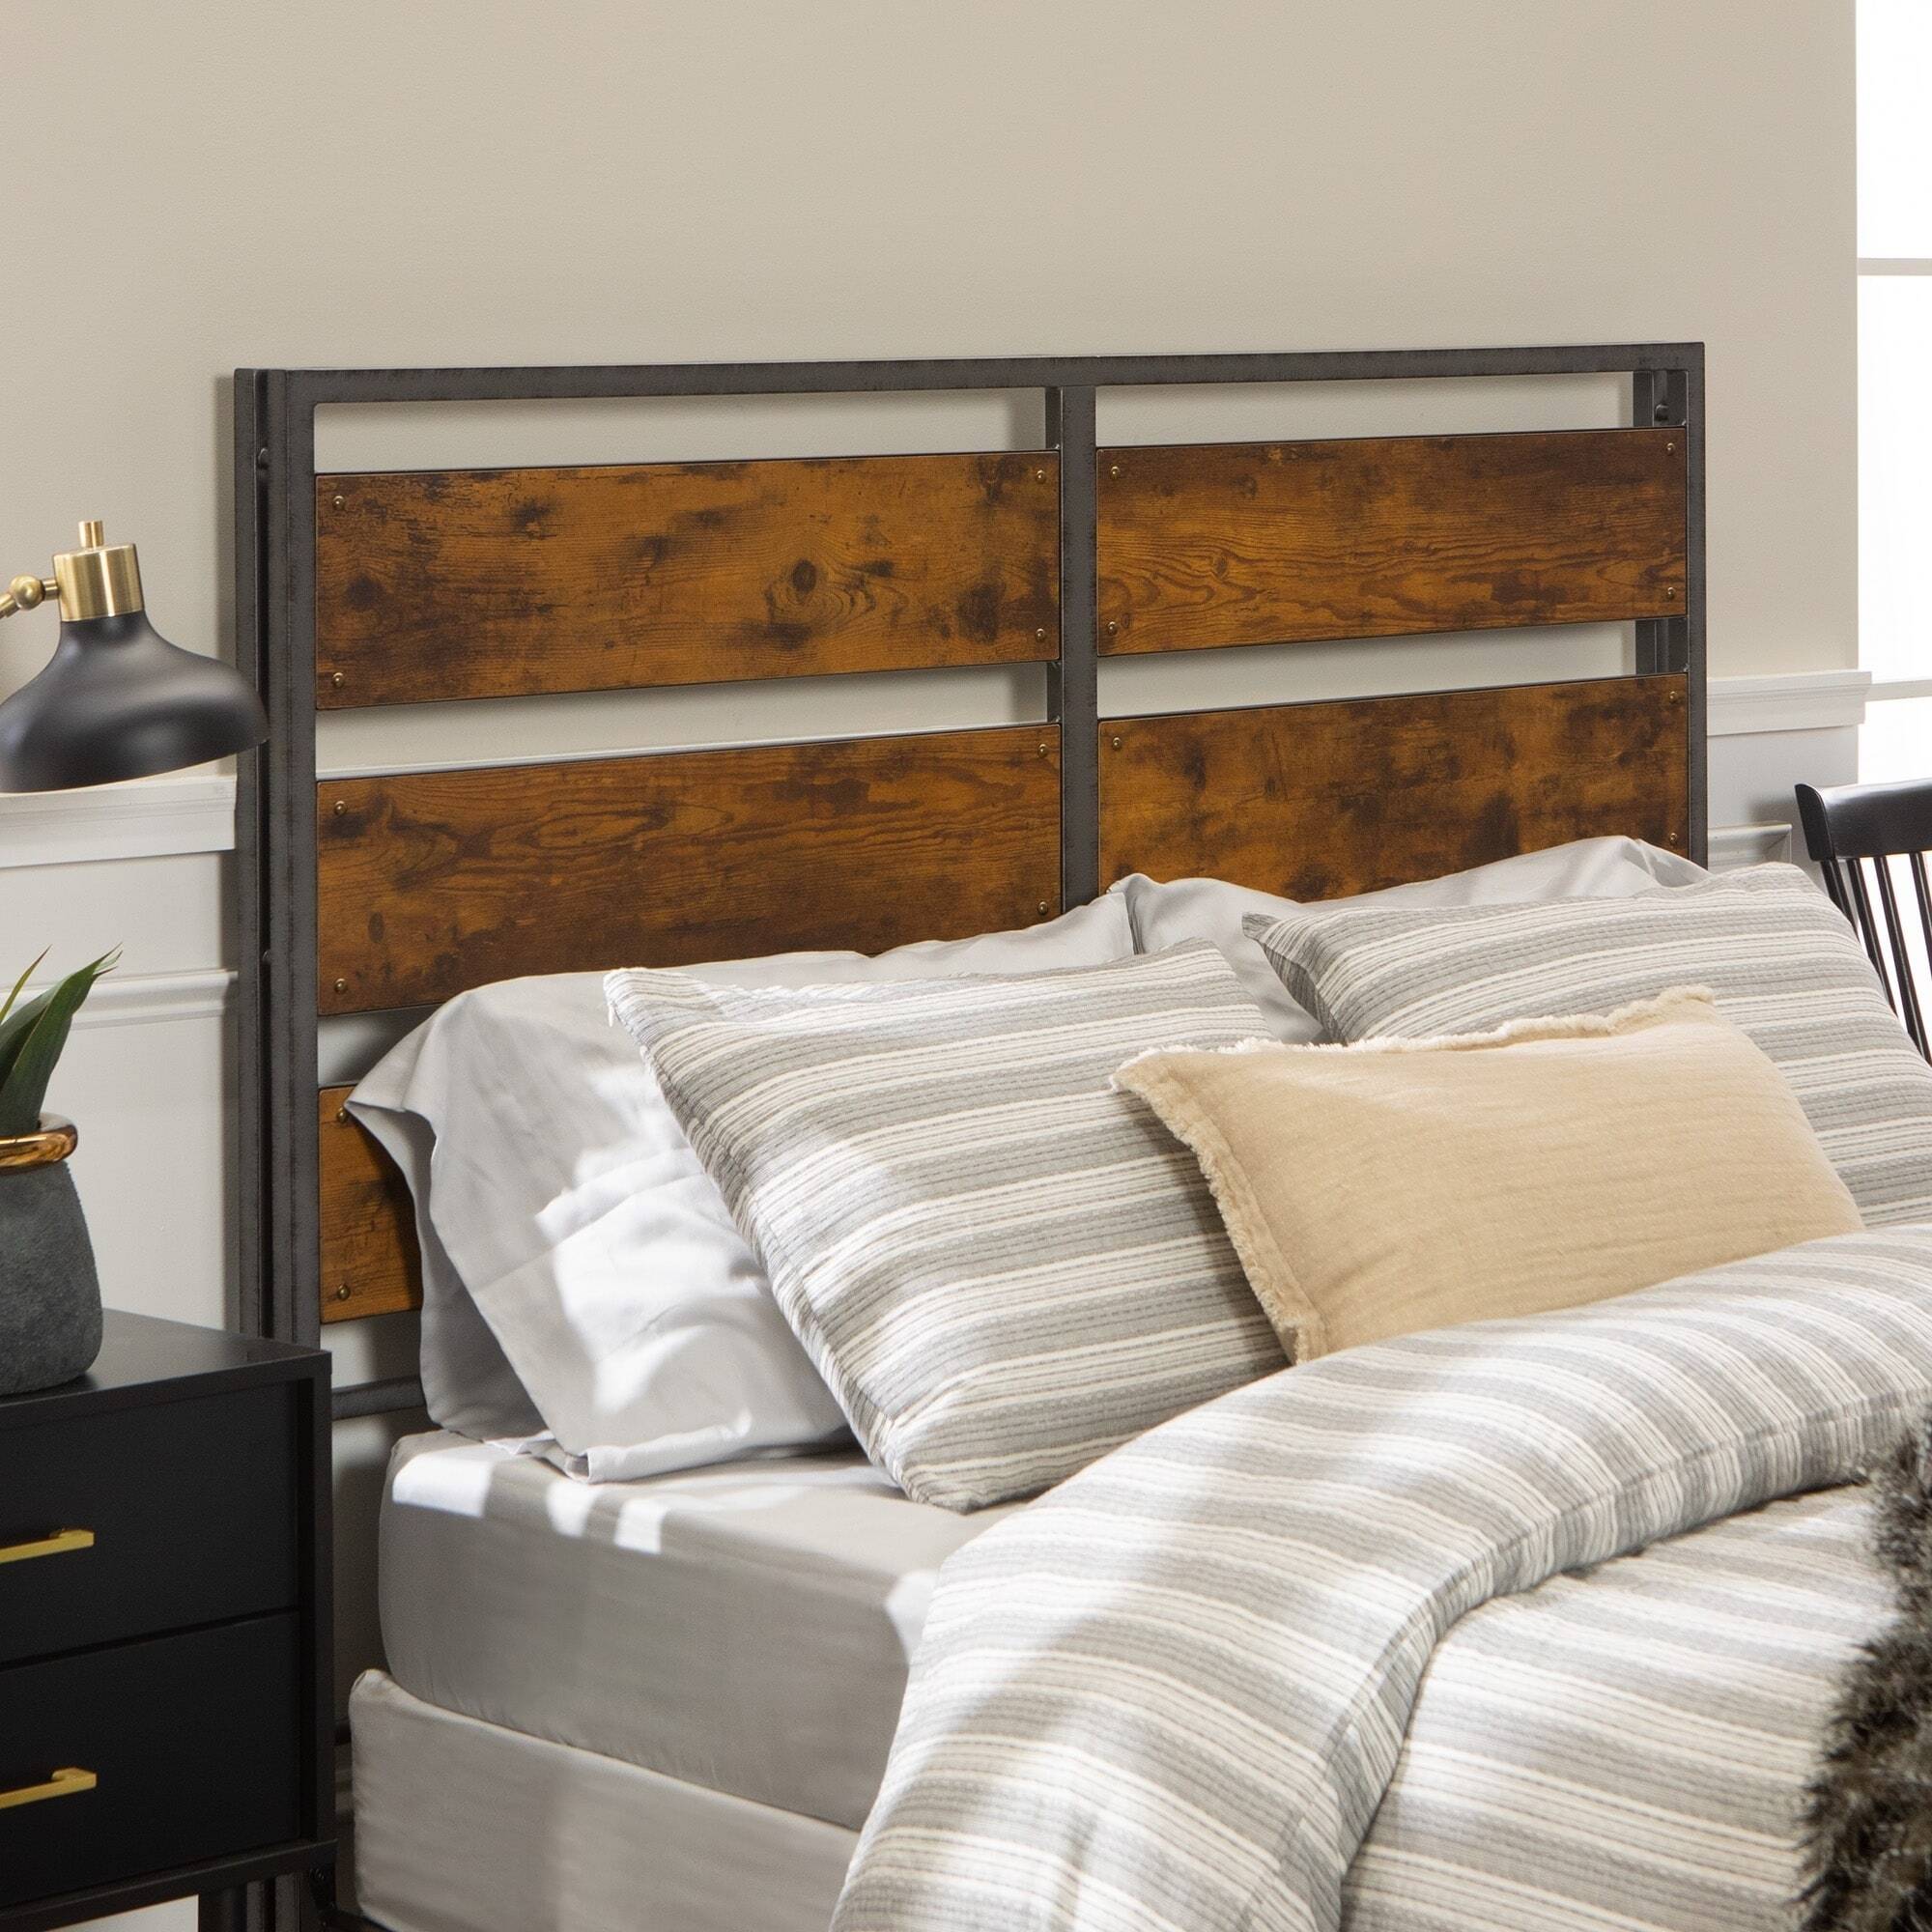 Wood and Metal Headboards With Plank Design